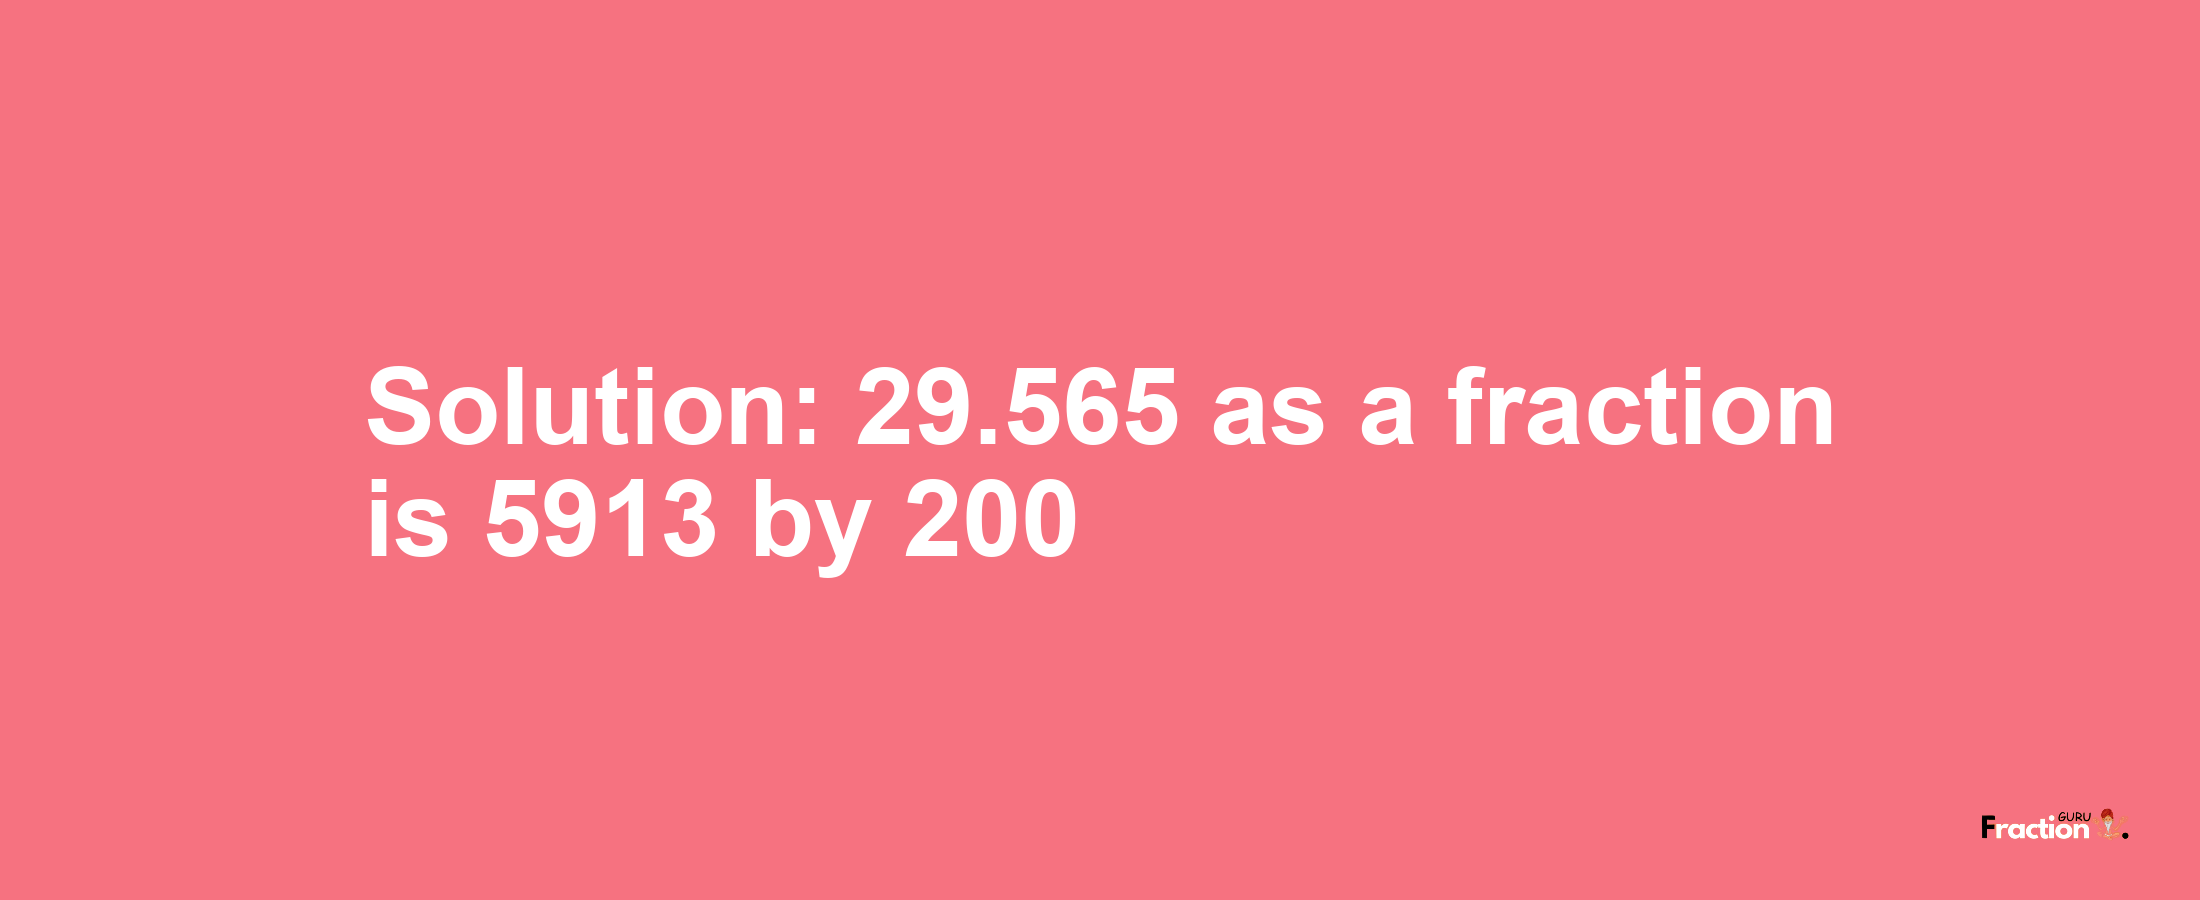 Solution:29.565 as a fraction is 5913/200